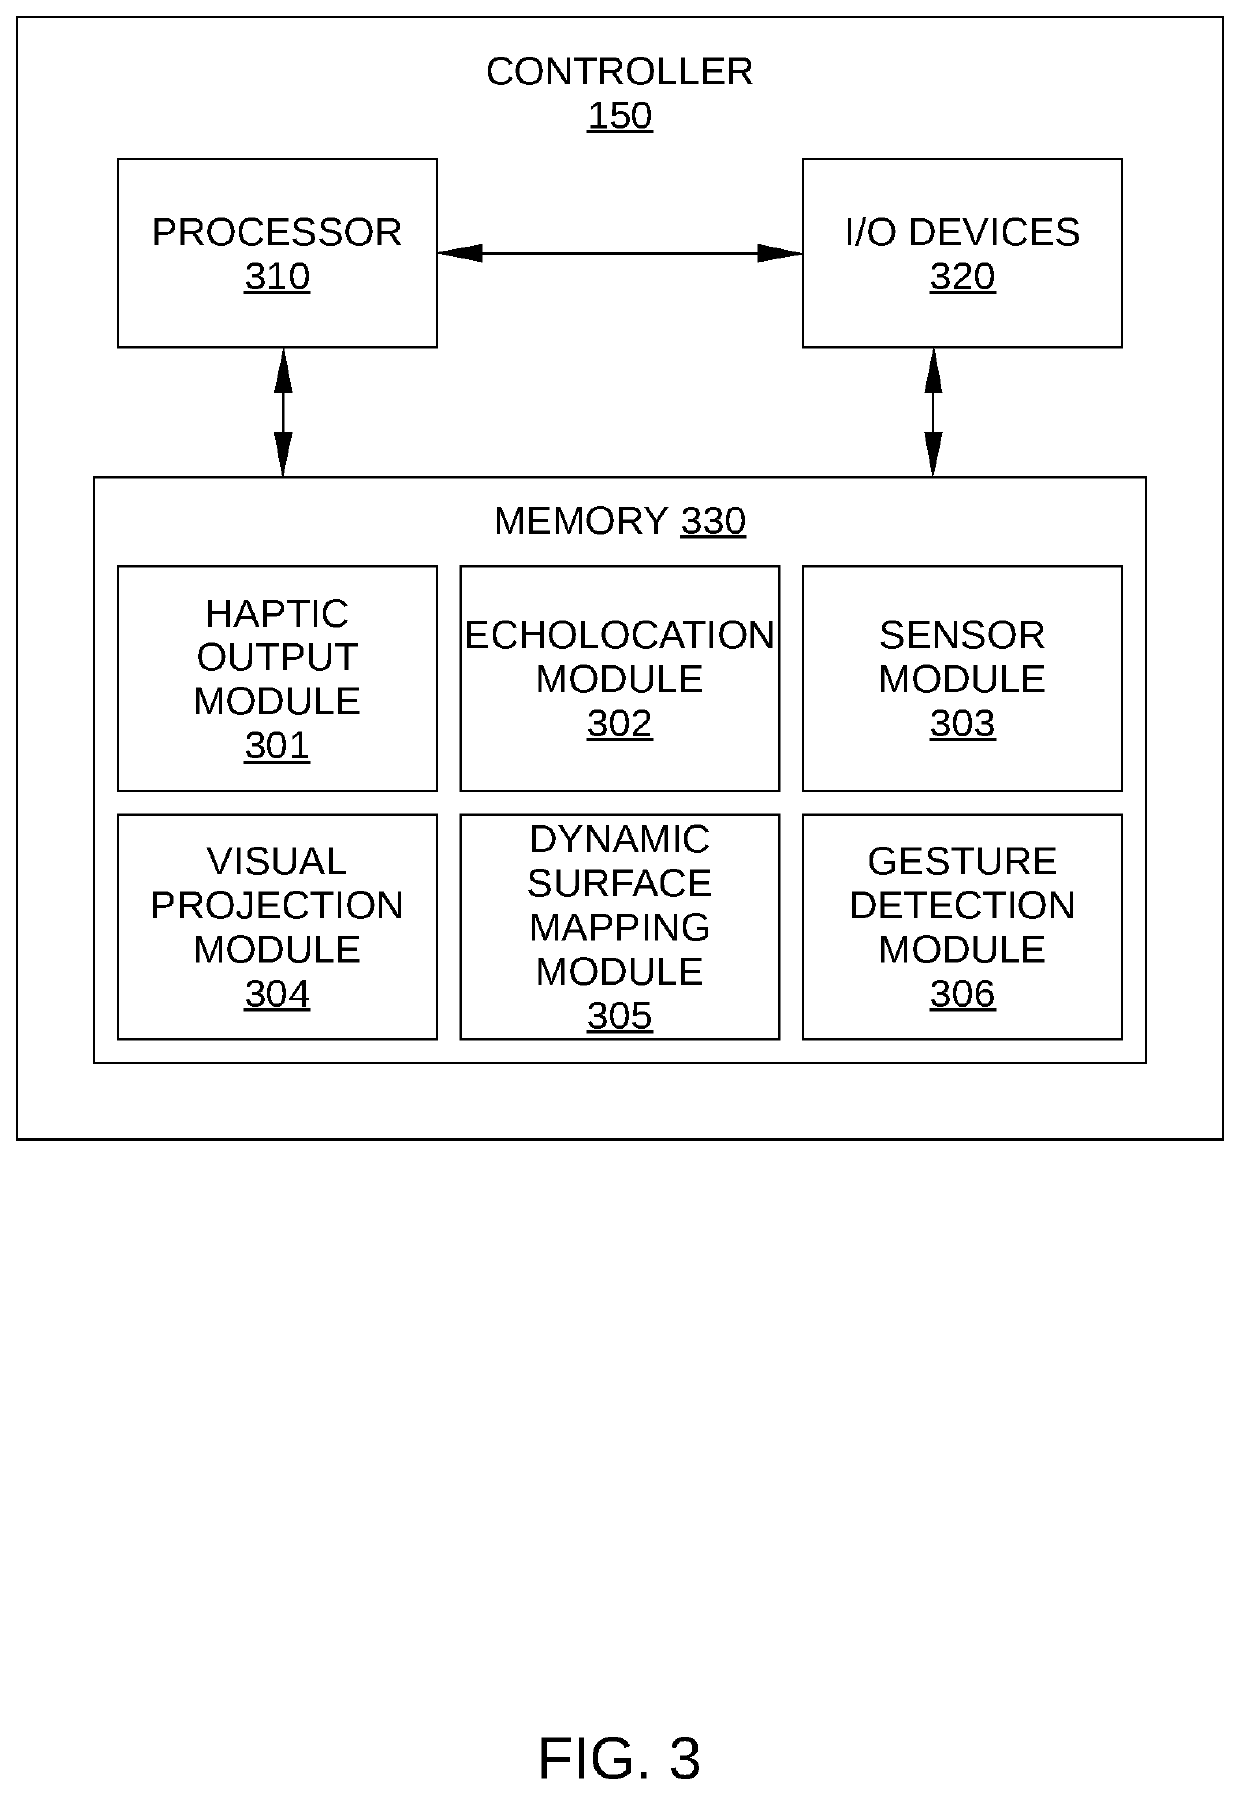 Interaction system using collocated visual, haptic, and/or auditory feedback